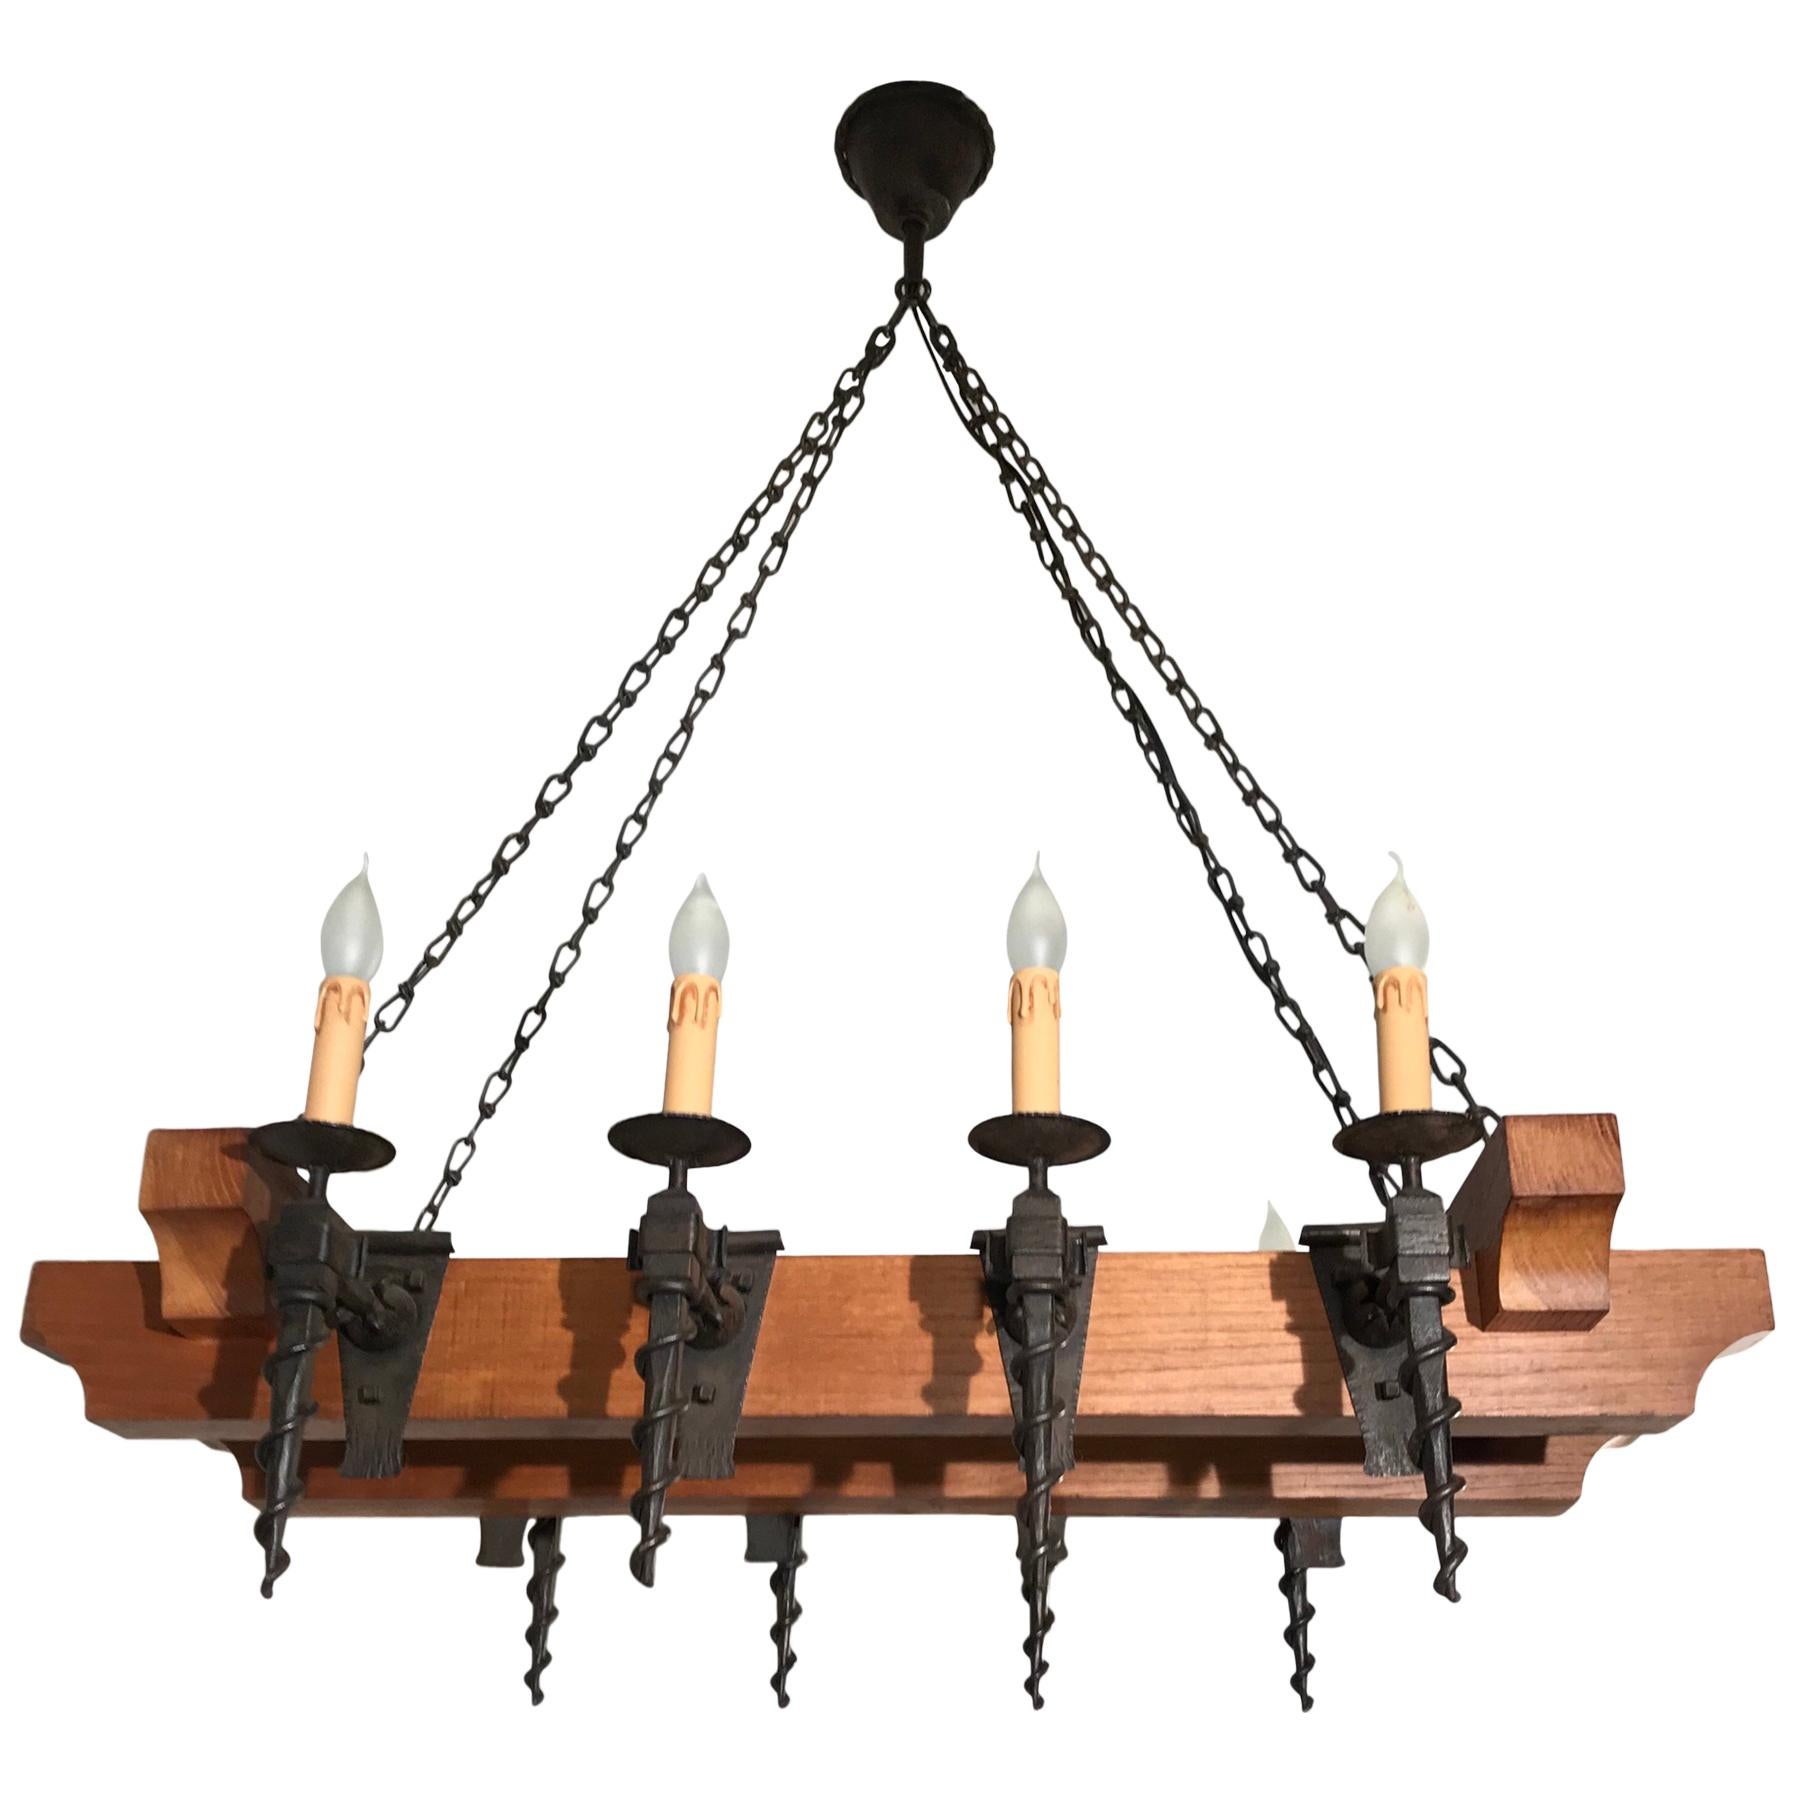 Heavy Quality Oak Beams and Wrought Iron Torches Arts & Crafts Chandelier Light